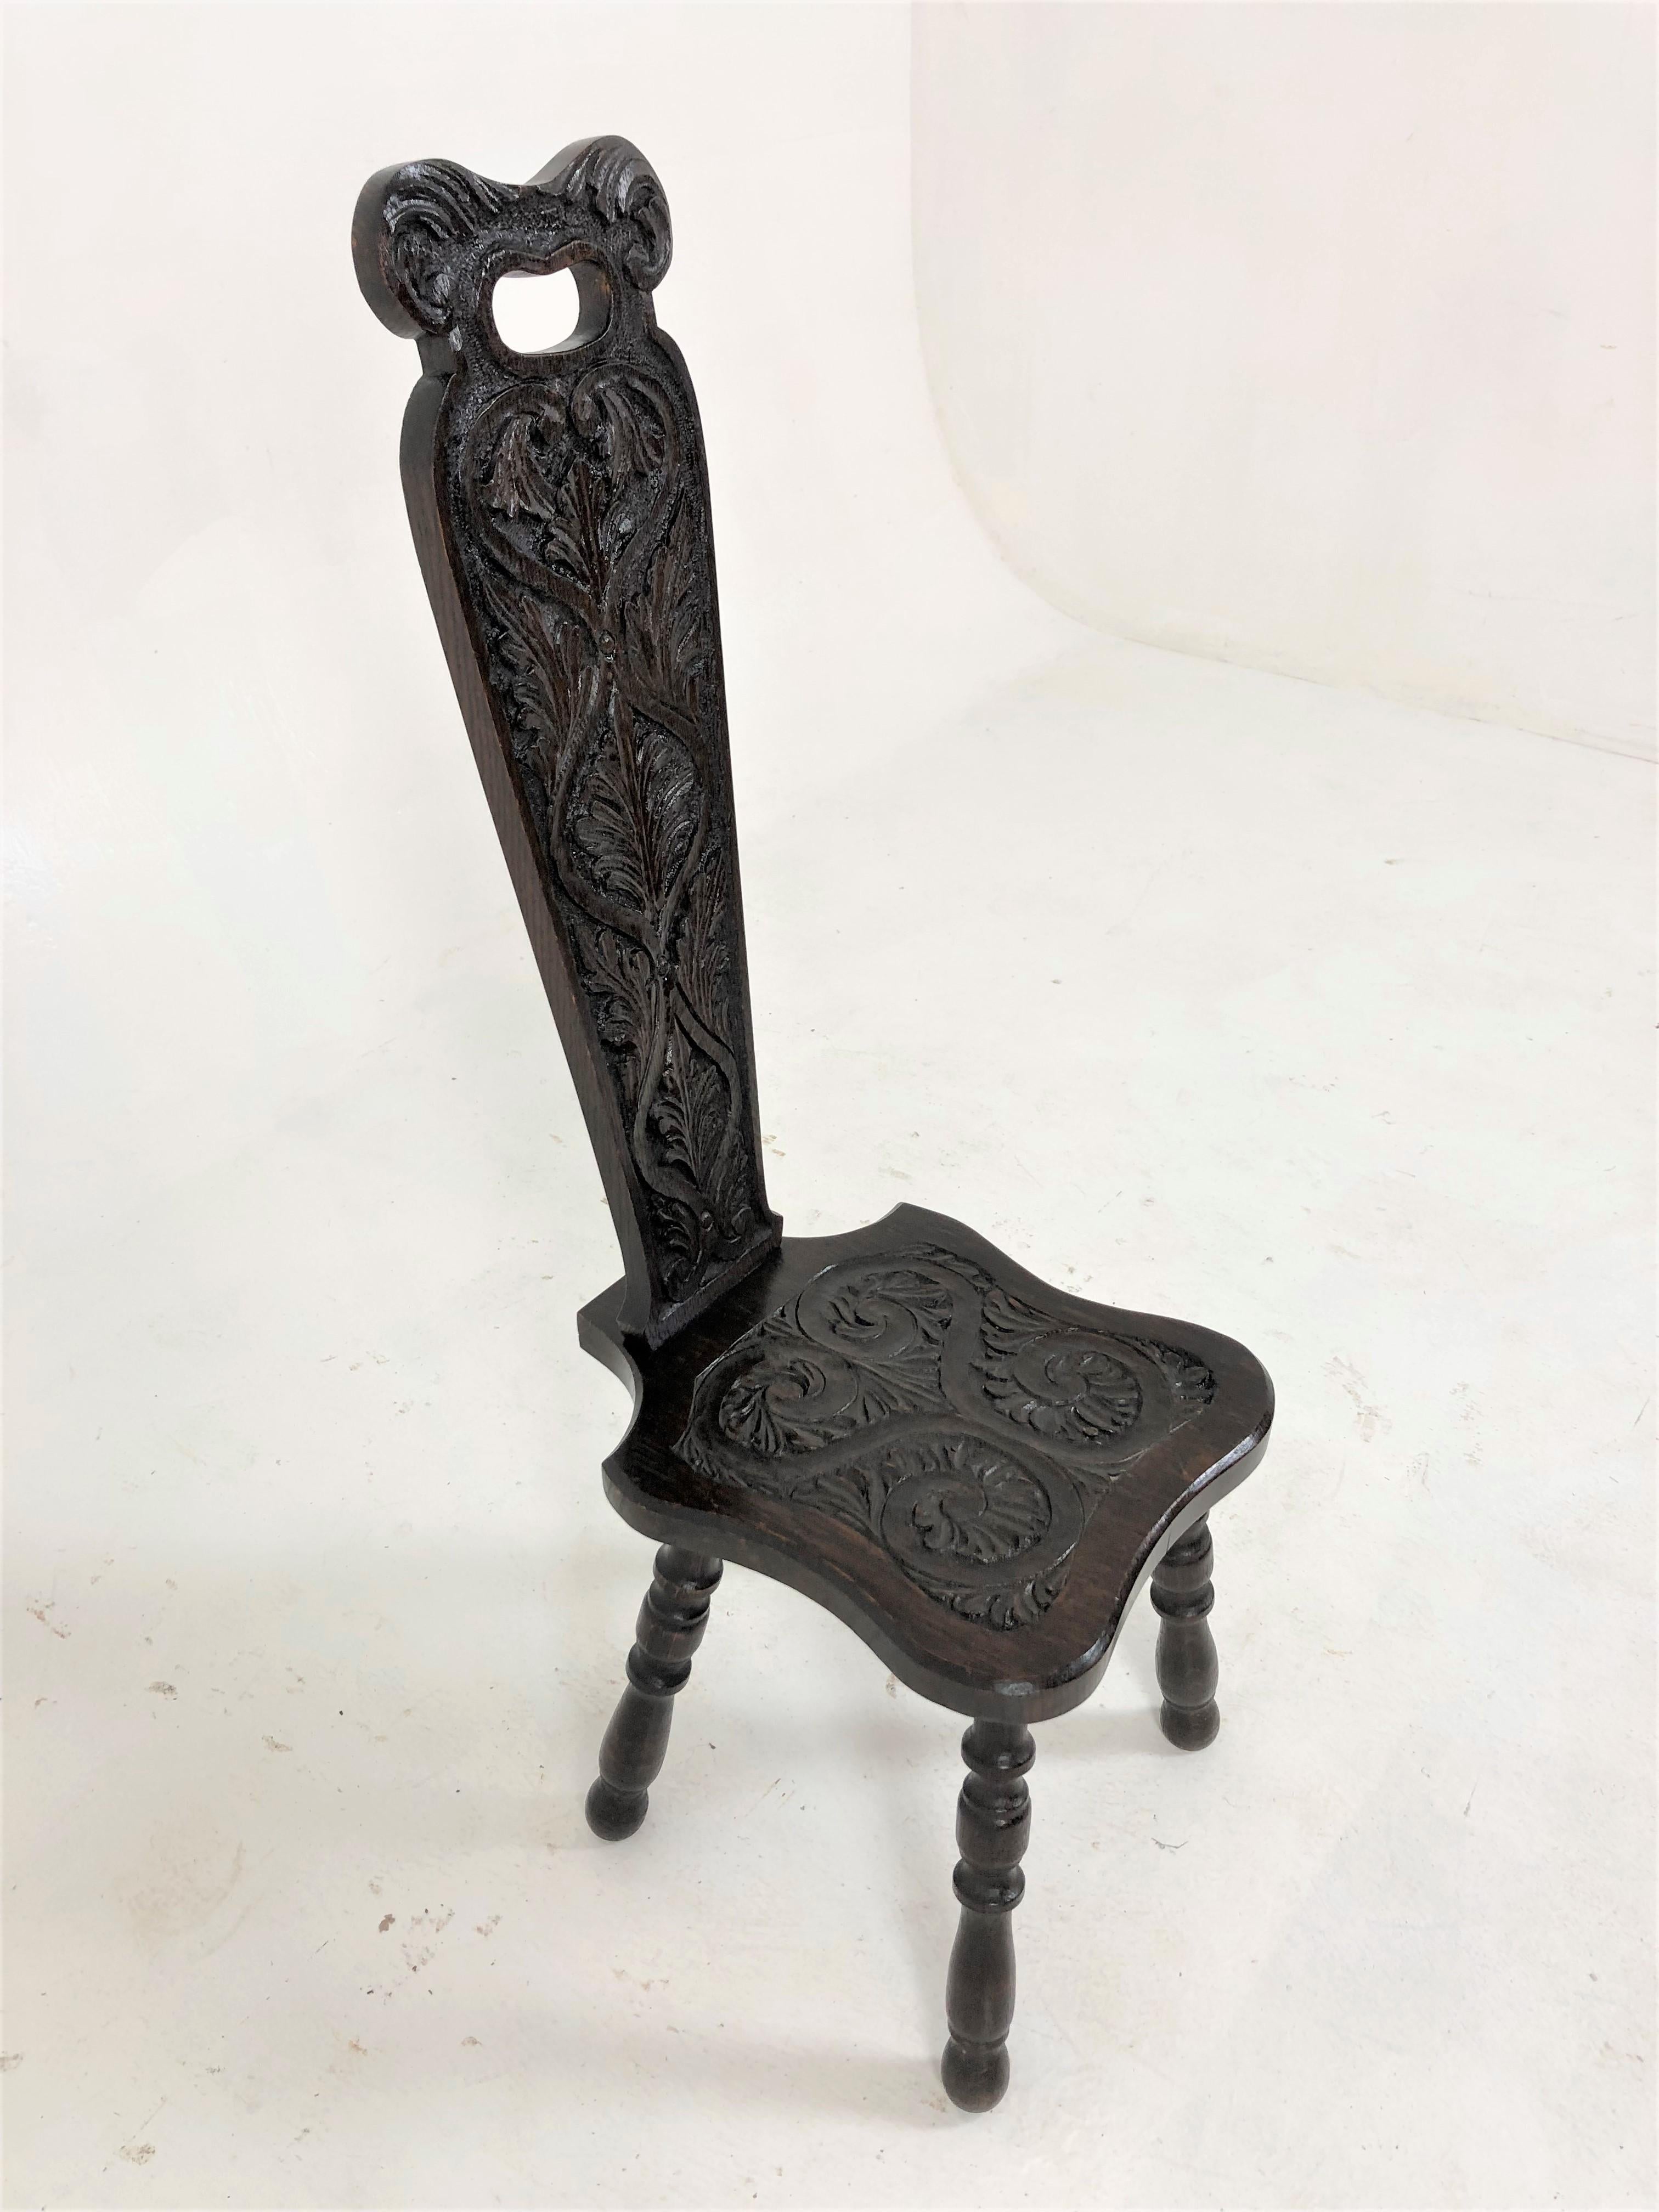 Antique Carved Oak spinning chair, plant stand, Scotland 1880, H709

Scotland 1880
Solid Oak
Original finish
Carved leaf back with a pierced handle
Carved shaped seat below
Raised on four turned supports
Nice carving and ing ood condition
All joints